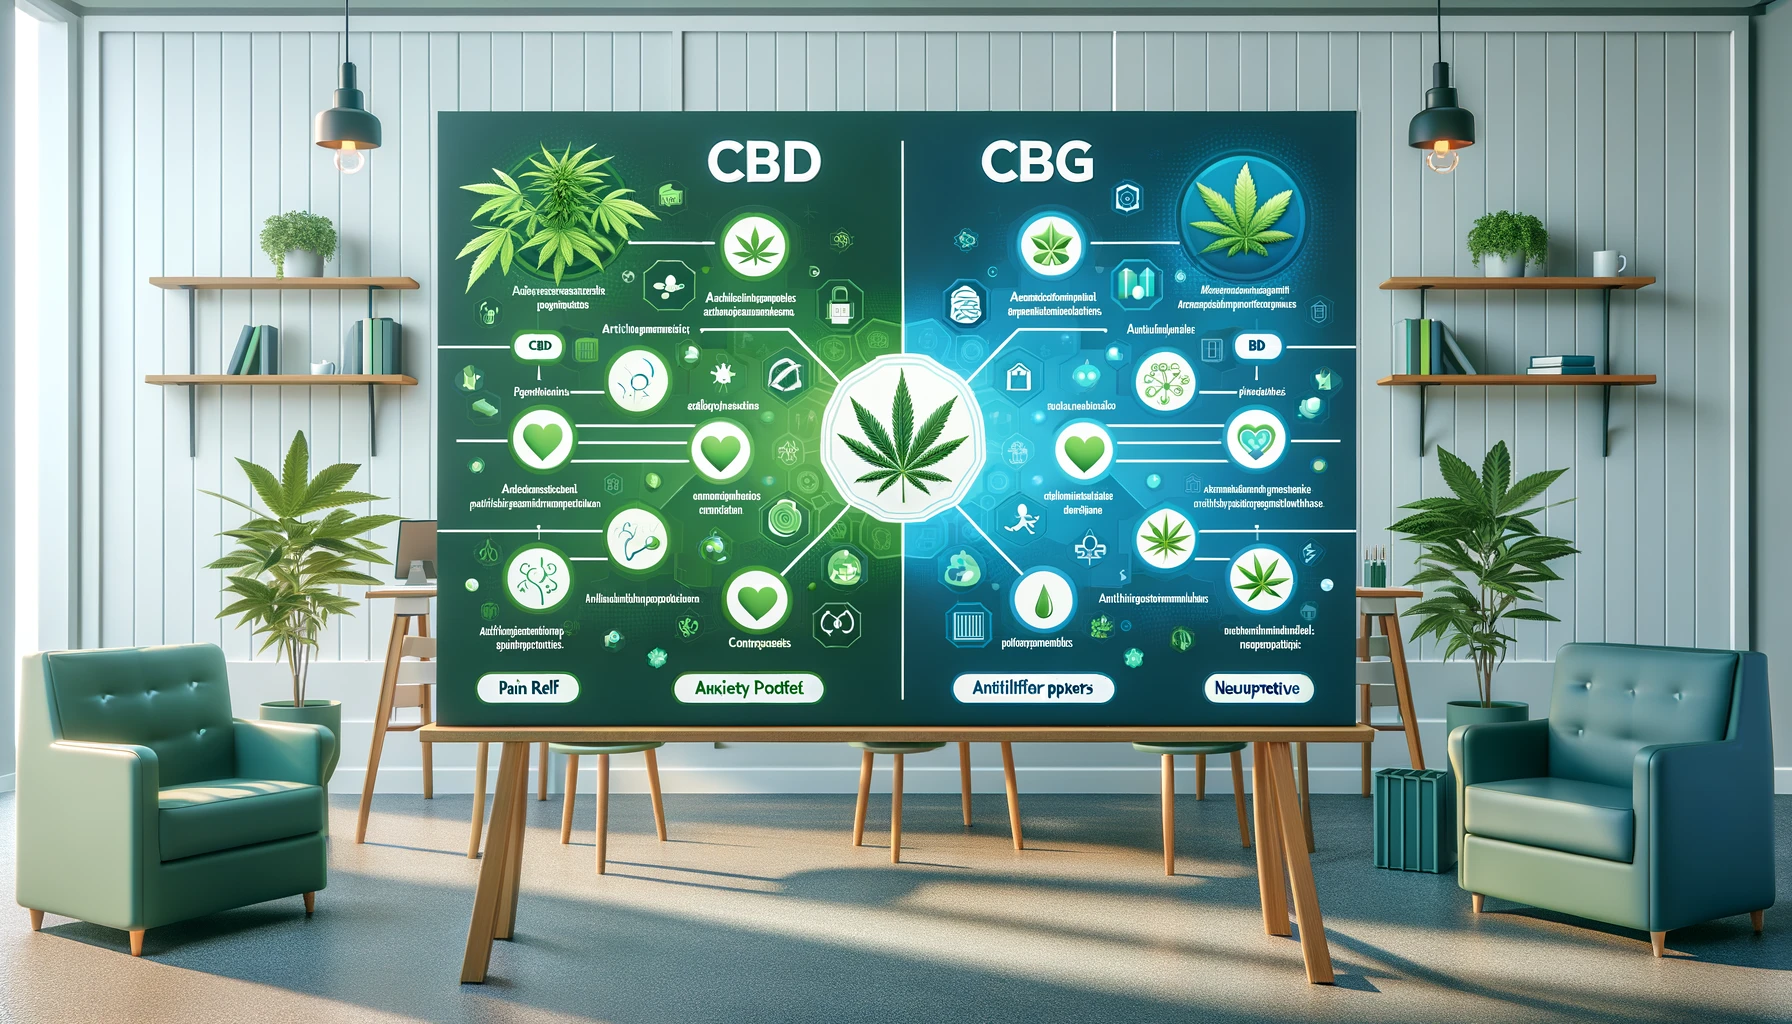 DALL·E 2024-02-20 15.17.31 - An infographic comparing the benefits and uses of CBD and CBG, featuring icons for pain relief, anxiety reduction, anti-inflammatory properties, and n